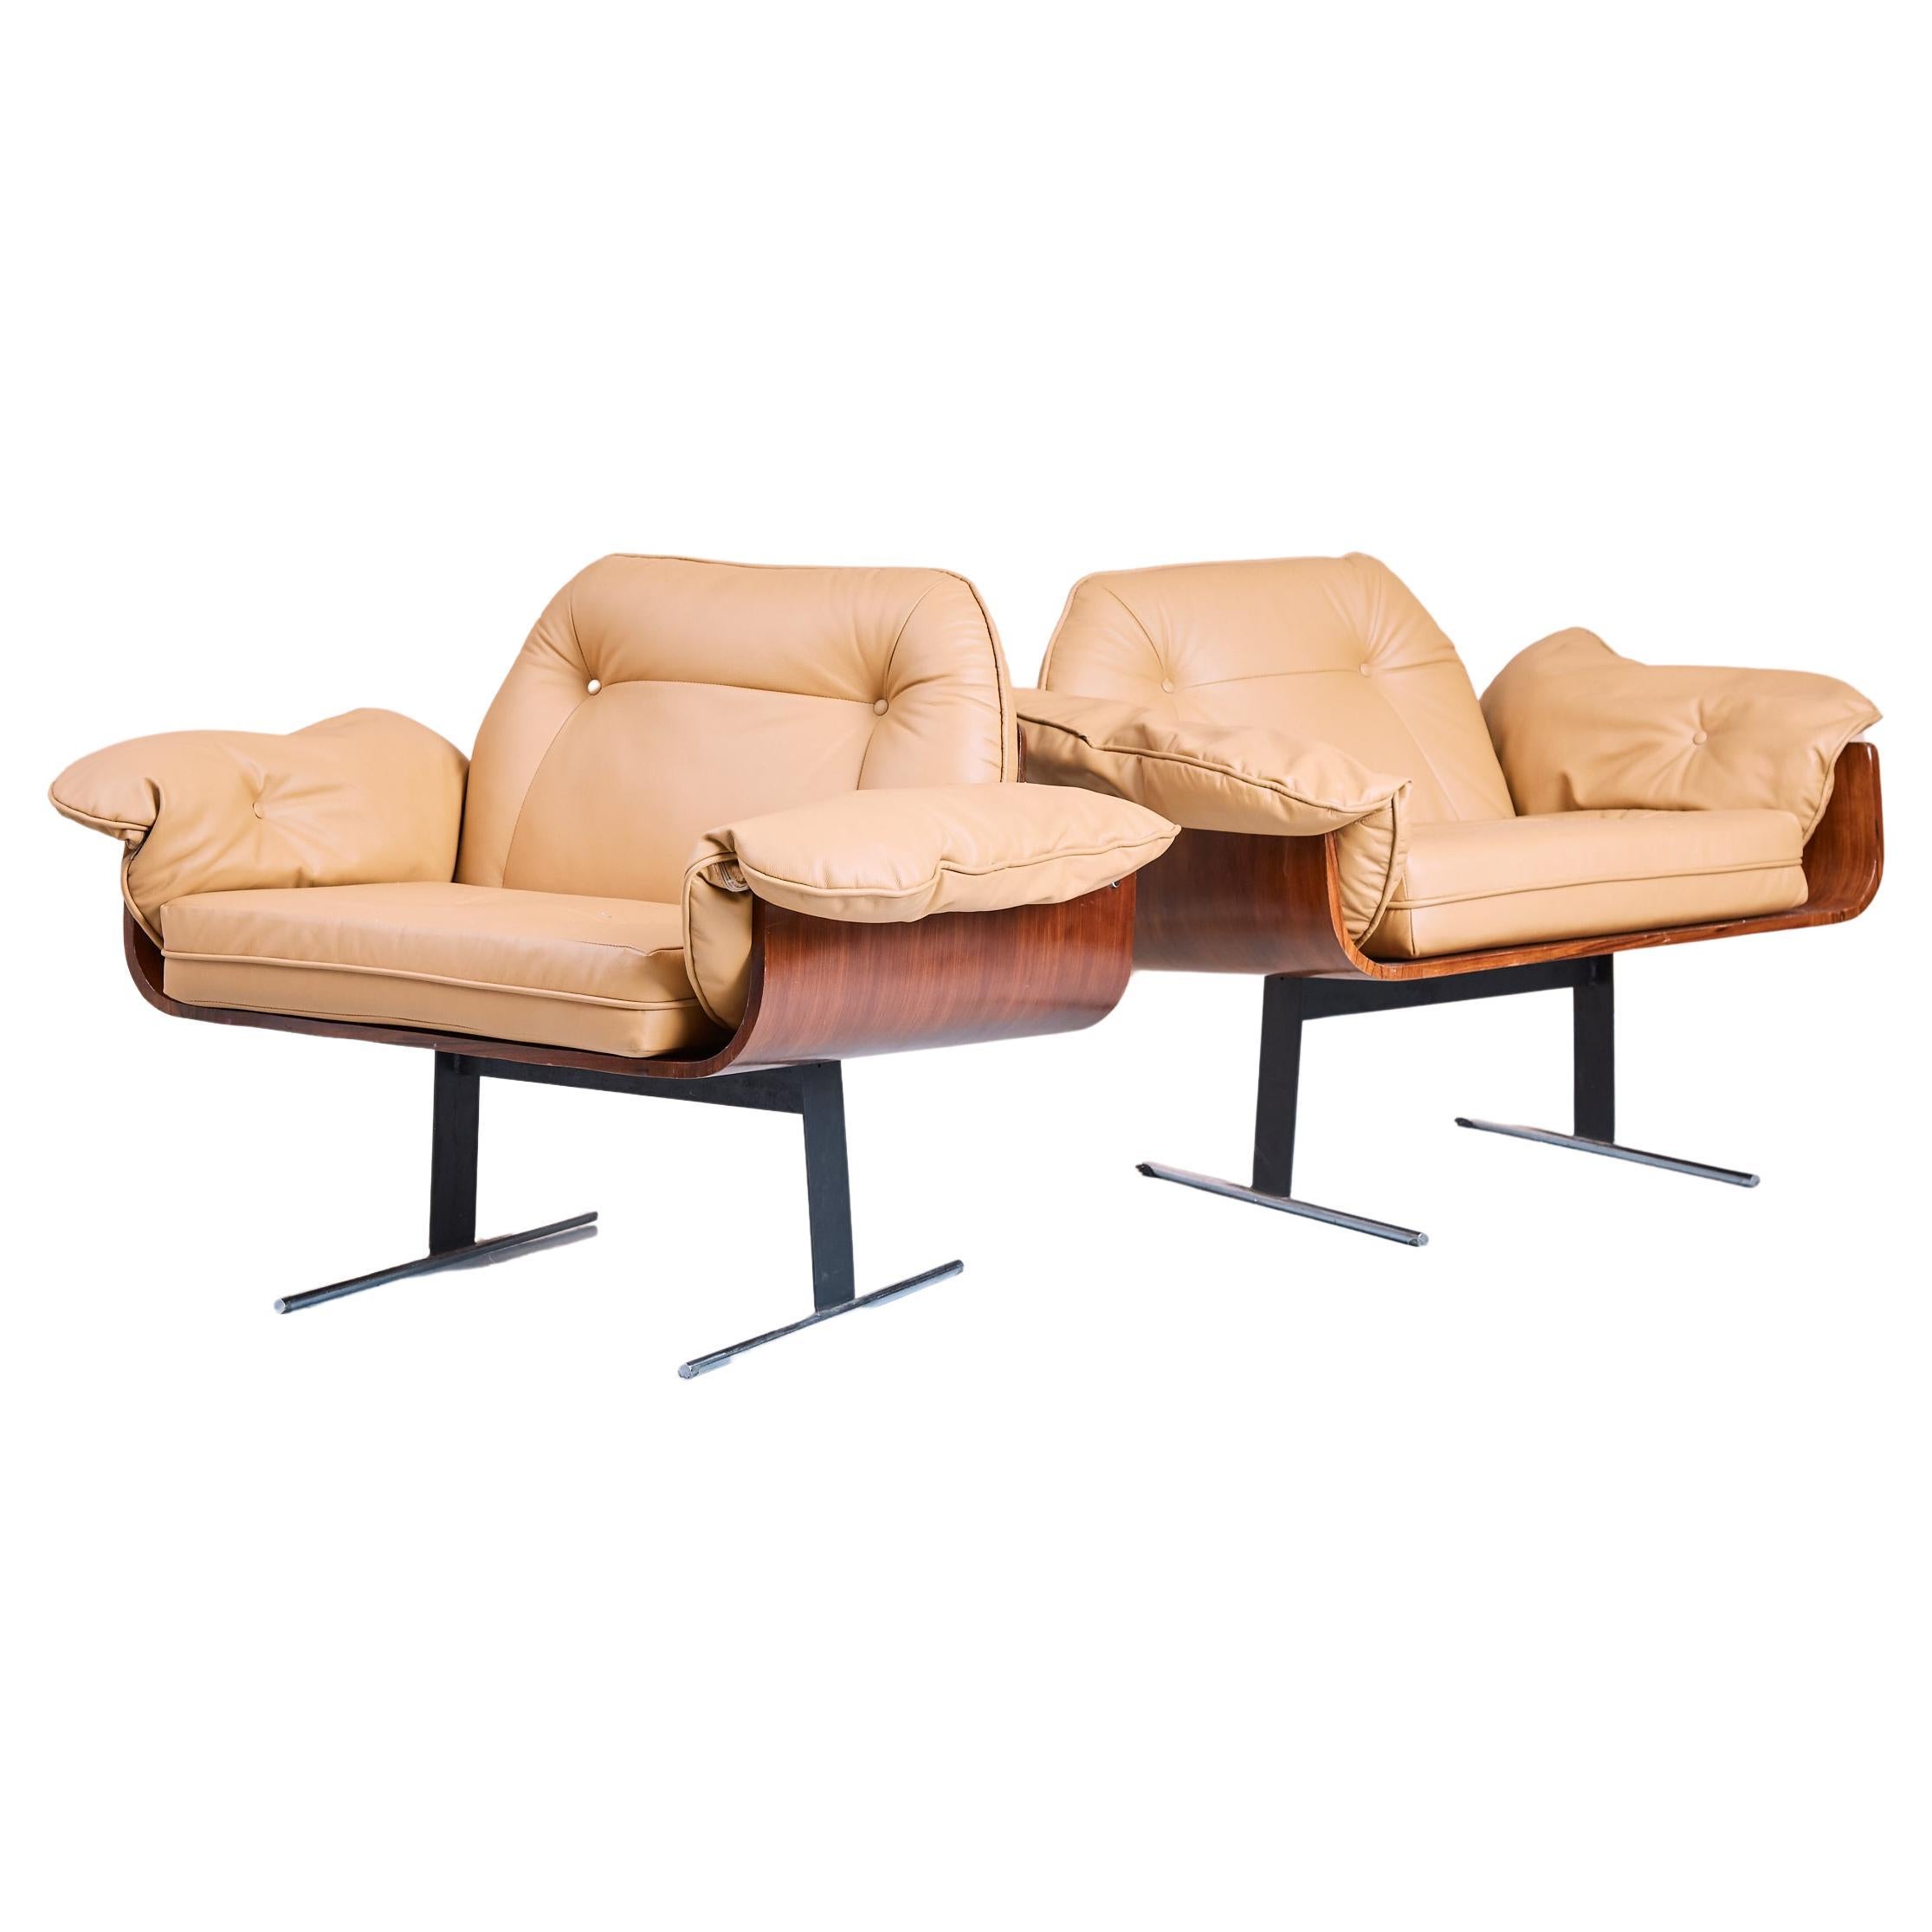 Pair of Brazilian 'Presidencial' Lounge Chairs by Jorge Zalszupin for L'Atelier For Sale